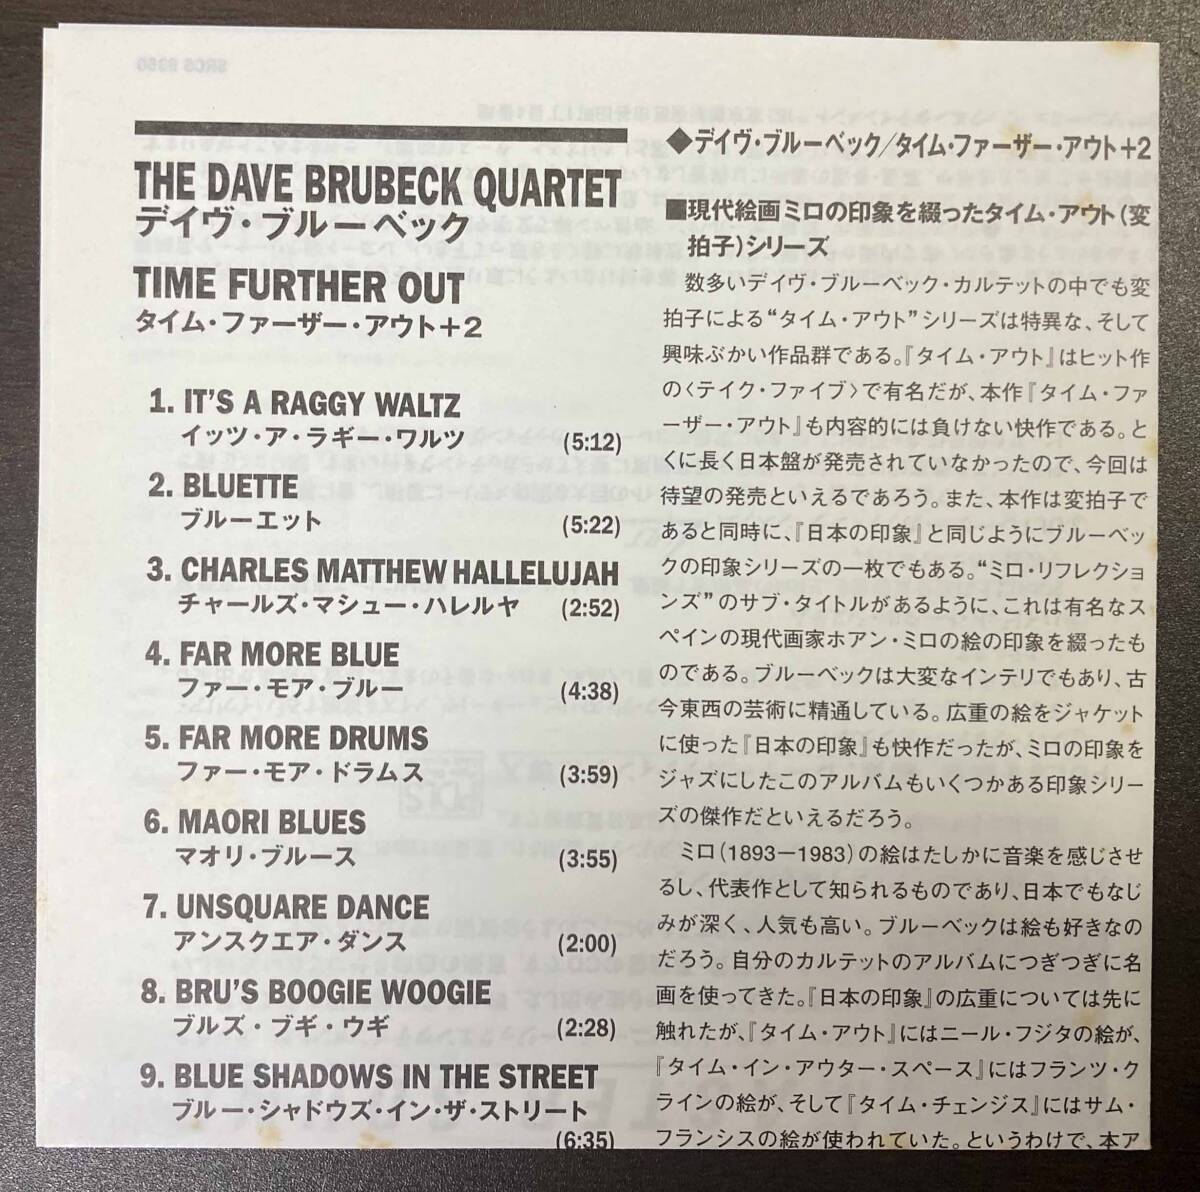 Dave Brubeck Quartet / Time Further Out 中古CD 国内盤 帯付き 紙ジャケ リマスタリング 初回限定盤 日本初CD化の画像4